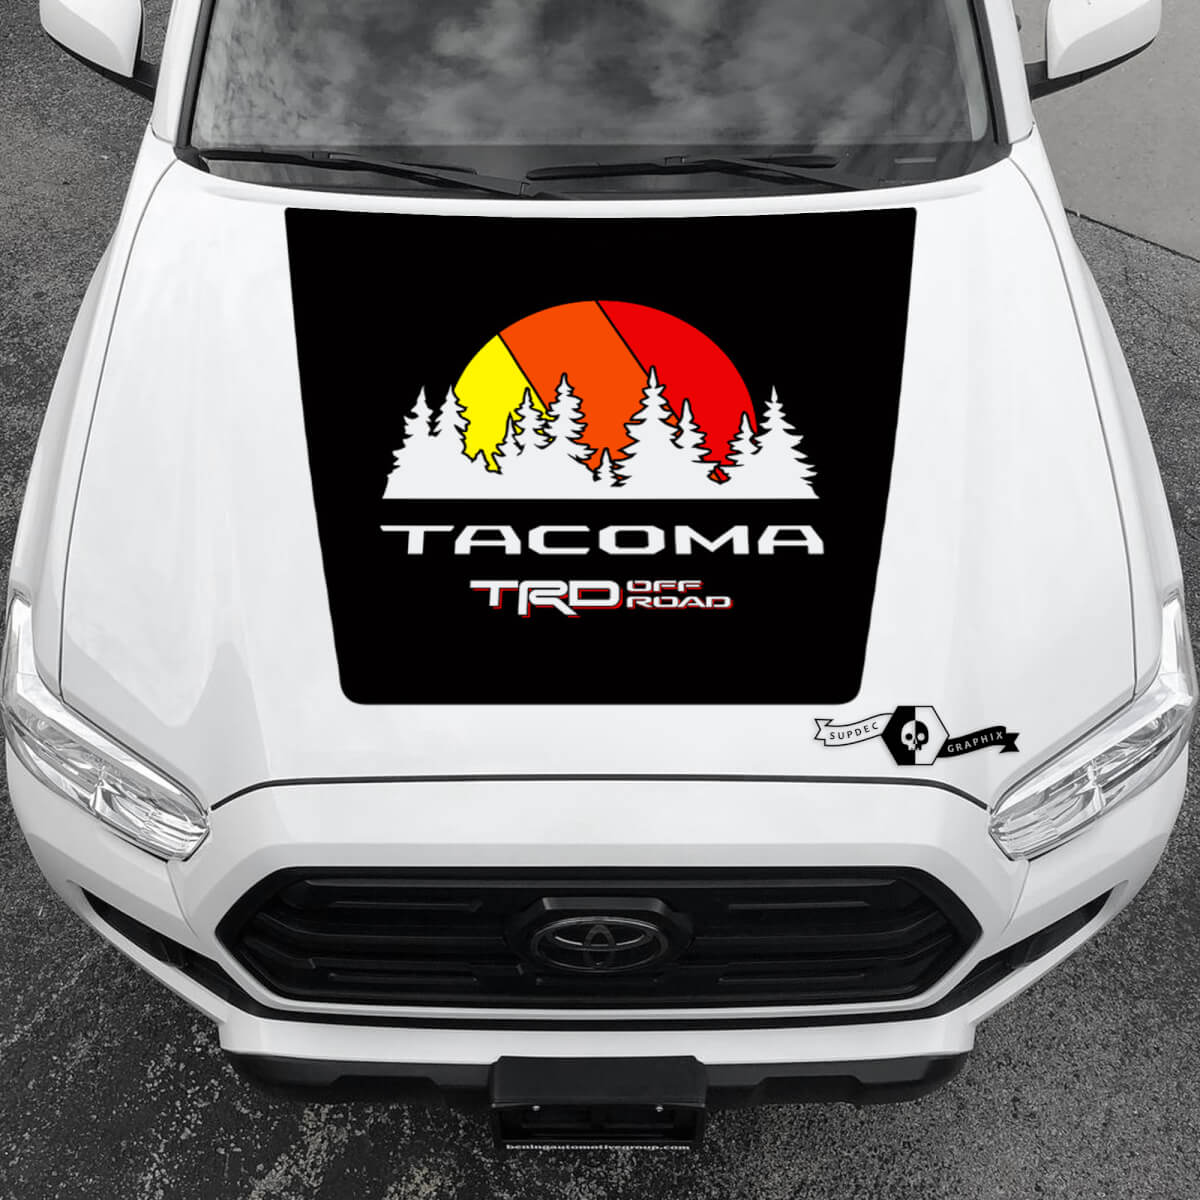 Tacoma TRD Sunrise Vintage TOYOTA Forest Hood Decals Stickers for Tacoma Tundra 4Runner Hilux